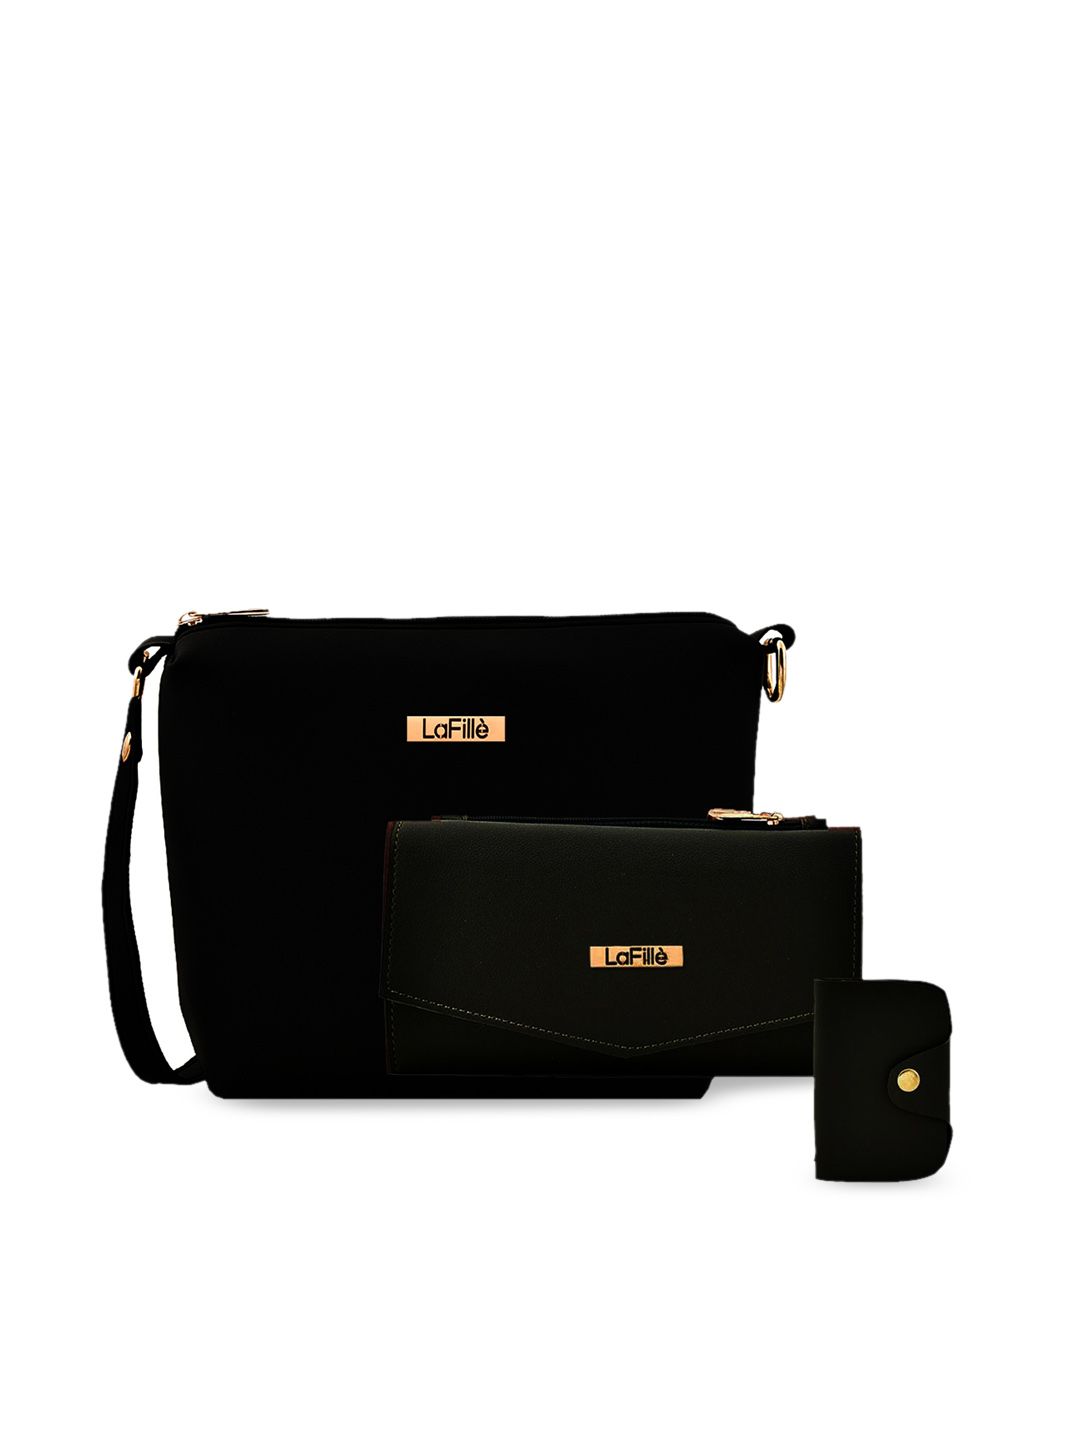 LaFille Black Structured Sling Bag With Wallet & Card Holder Price in India